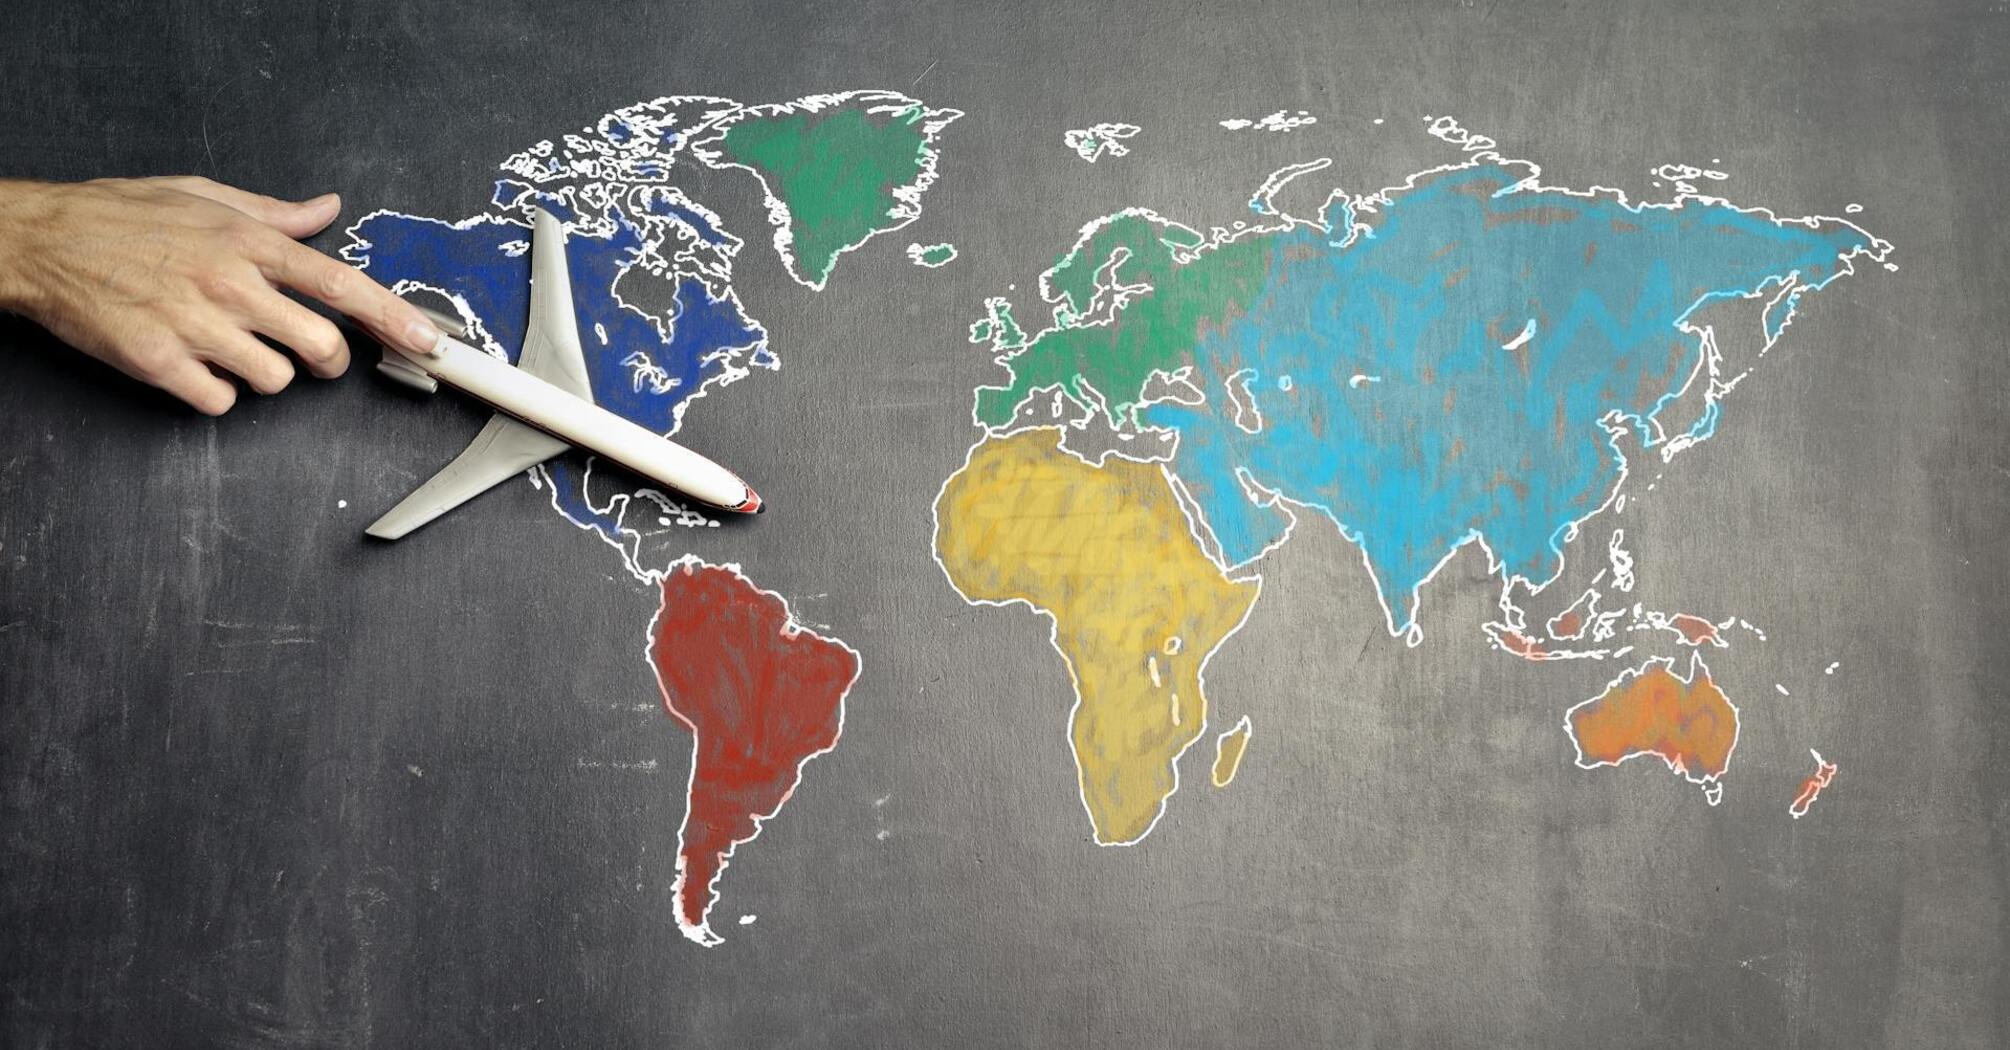 Hand holding a model airplane over a chalk-drawn map of the world on a blackboard